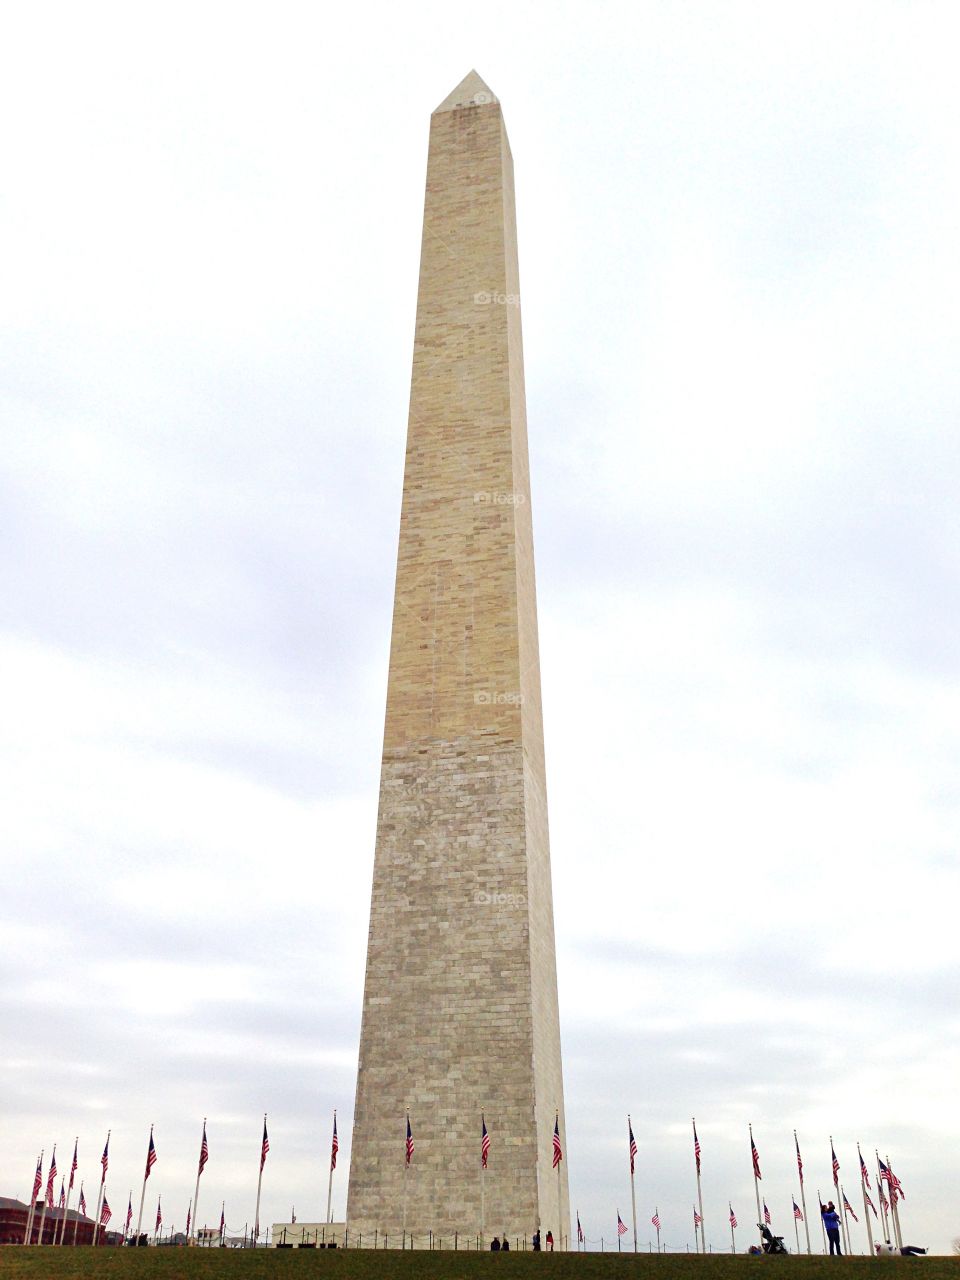 No Person, Outdoors, Architecture, Sky, Obelisk